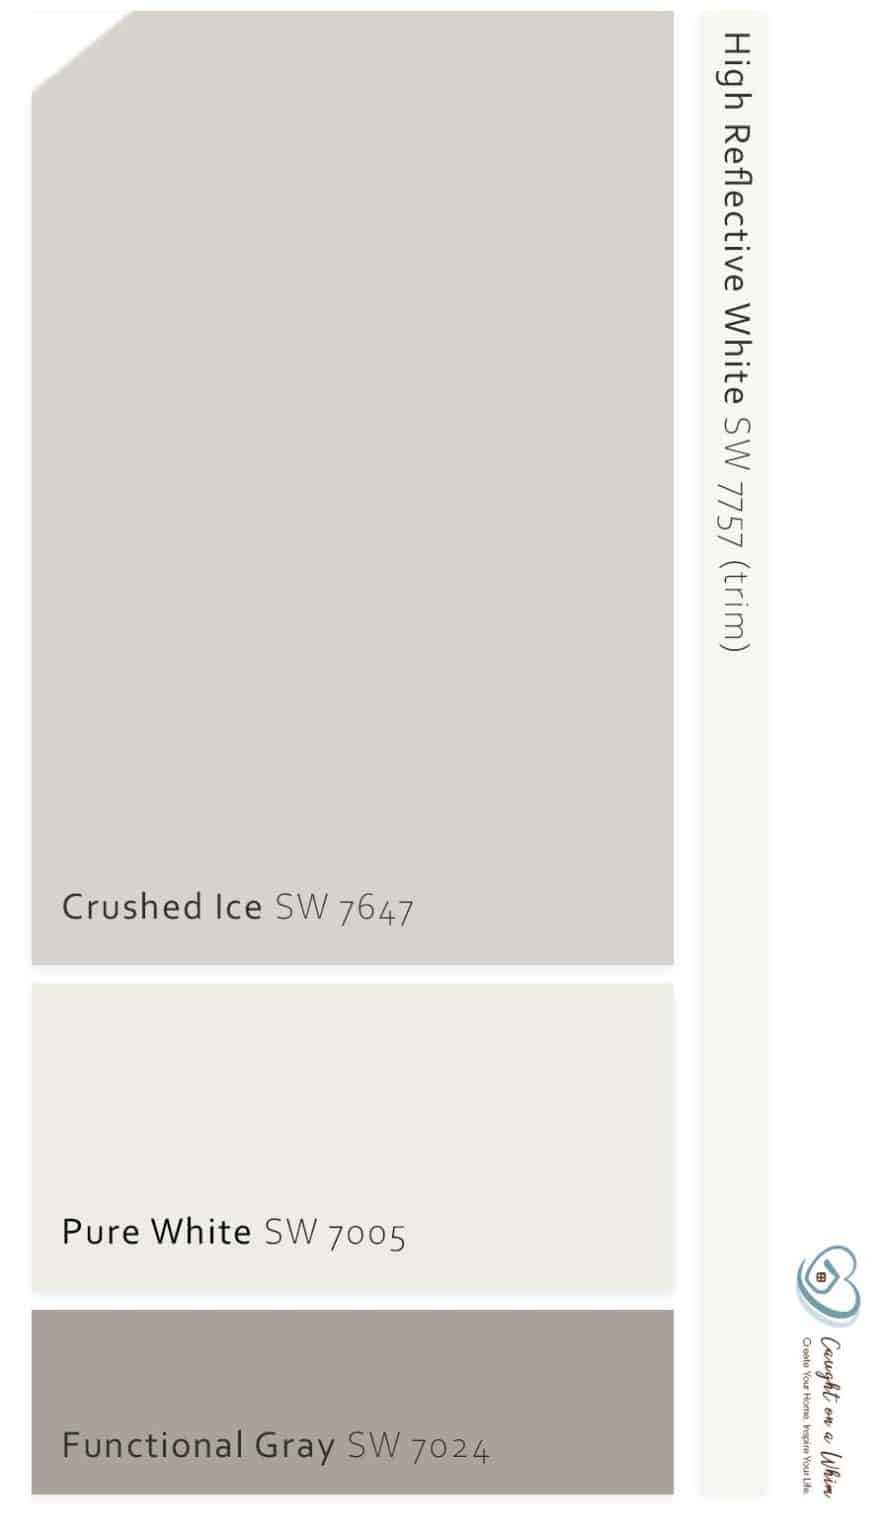 Sherwin-Williams Crushed Ice SW 7647 - A Sleek Gray Like No Other